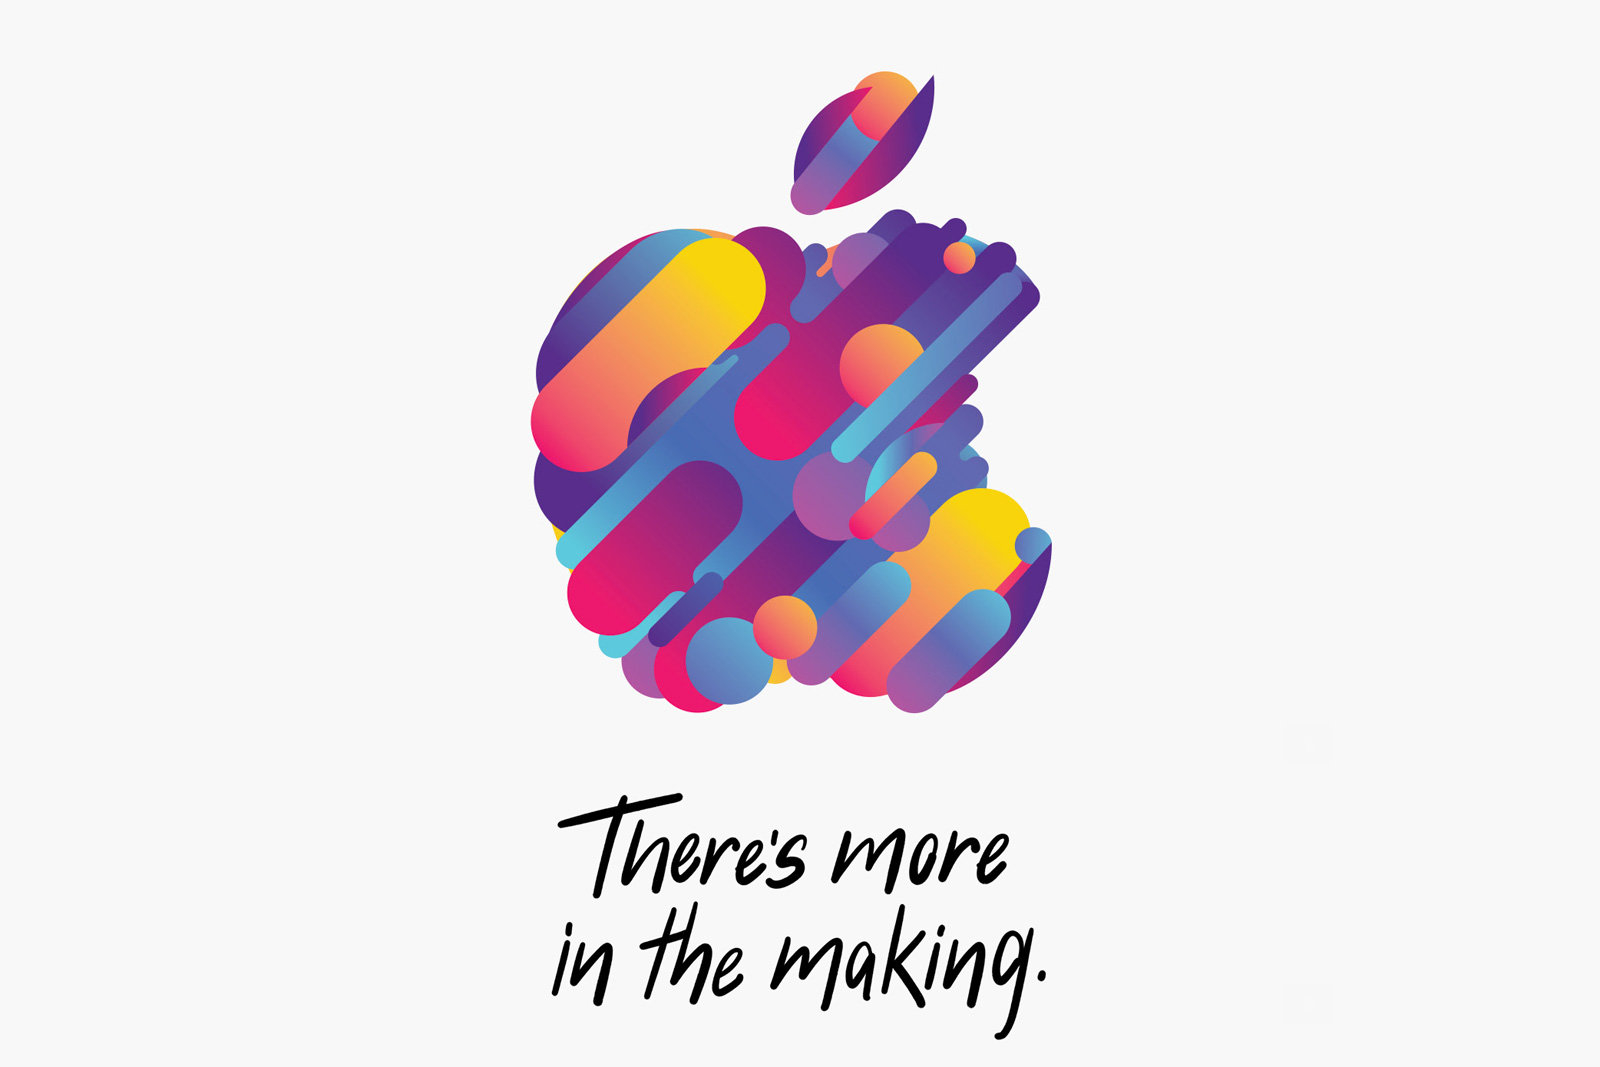 Apple is holding its iPad and Mac event on October 30th